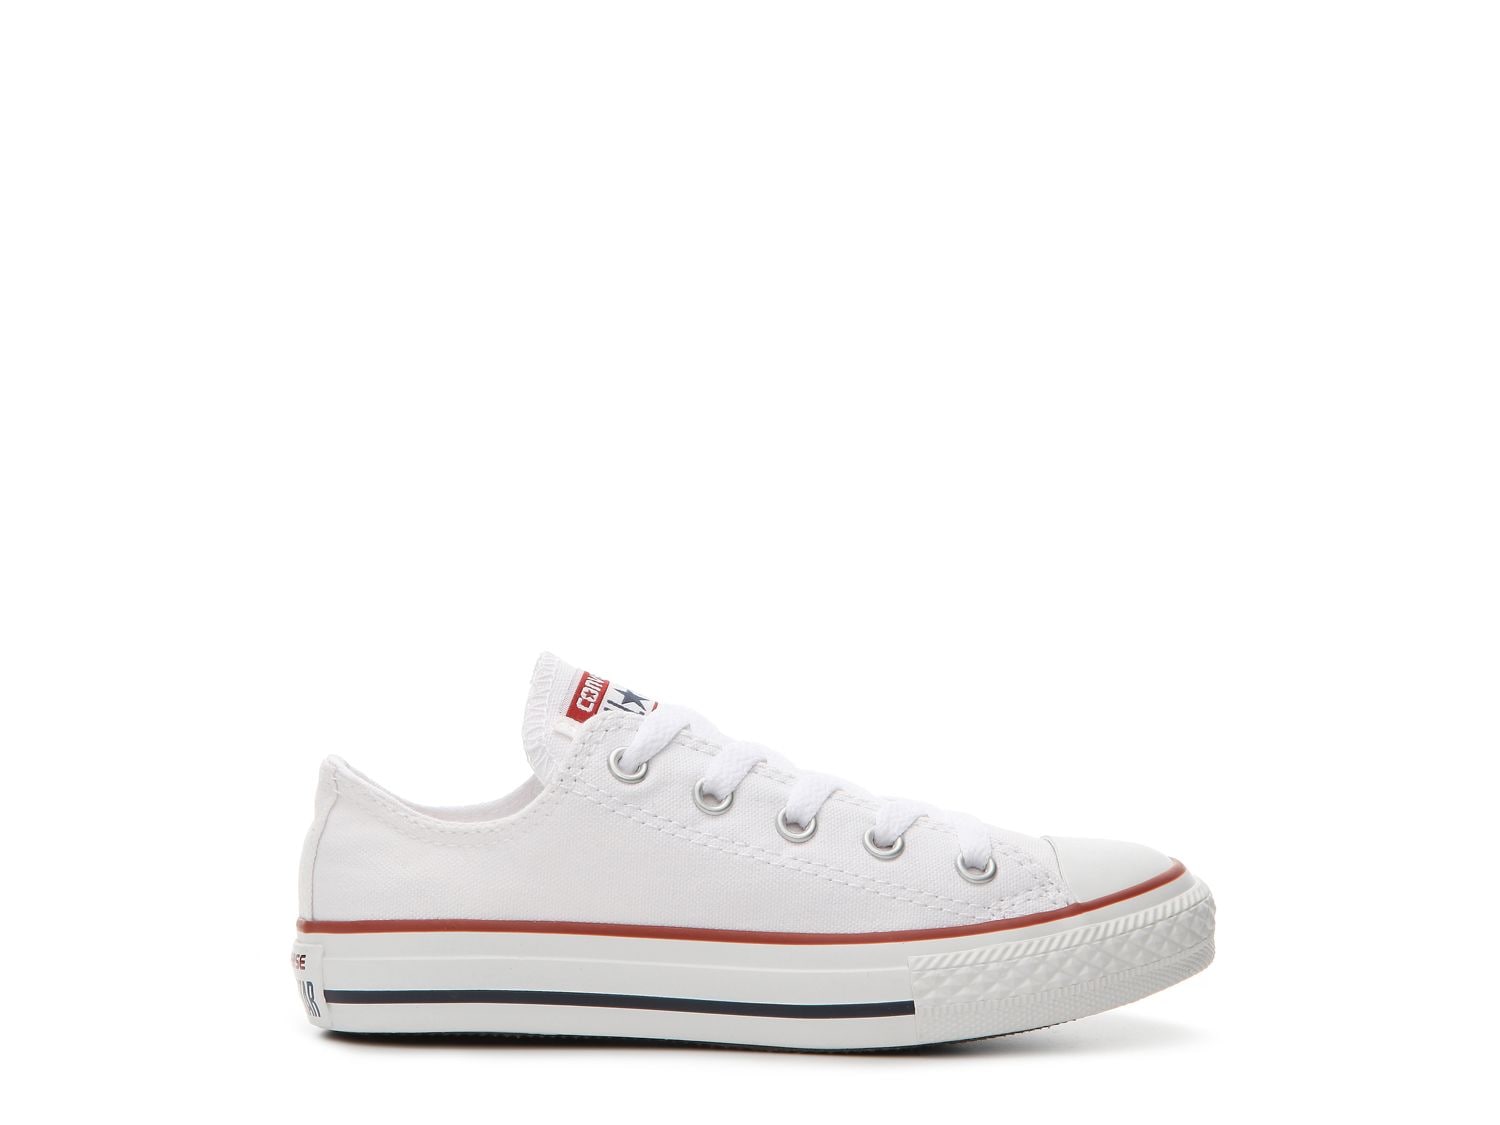 converse size 3 youth